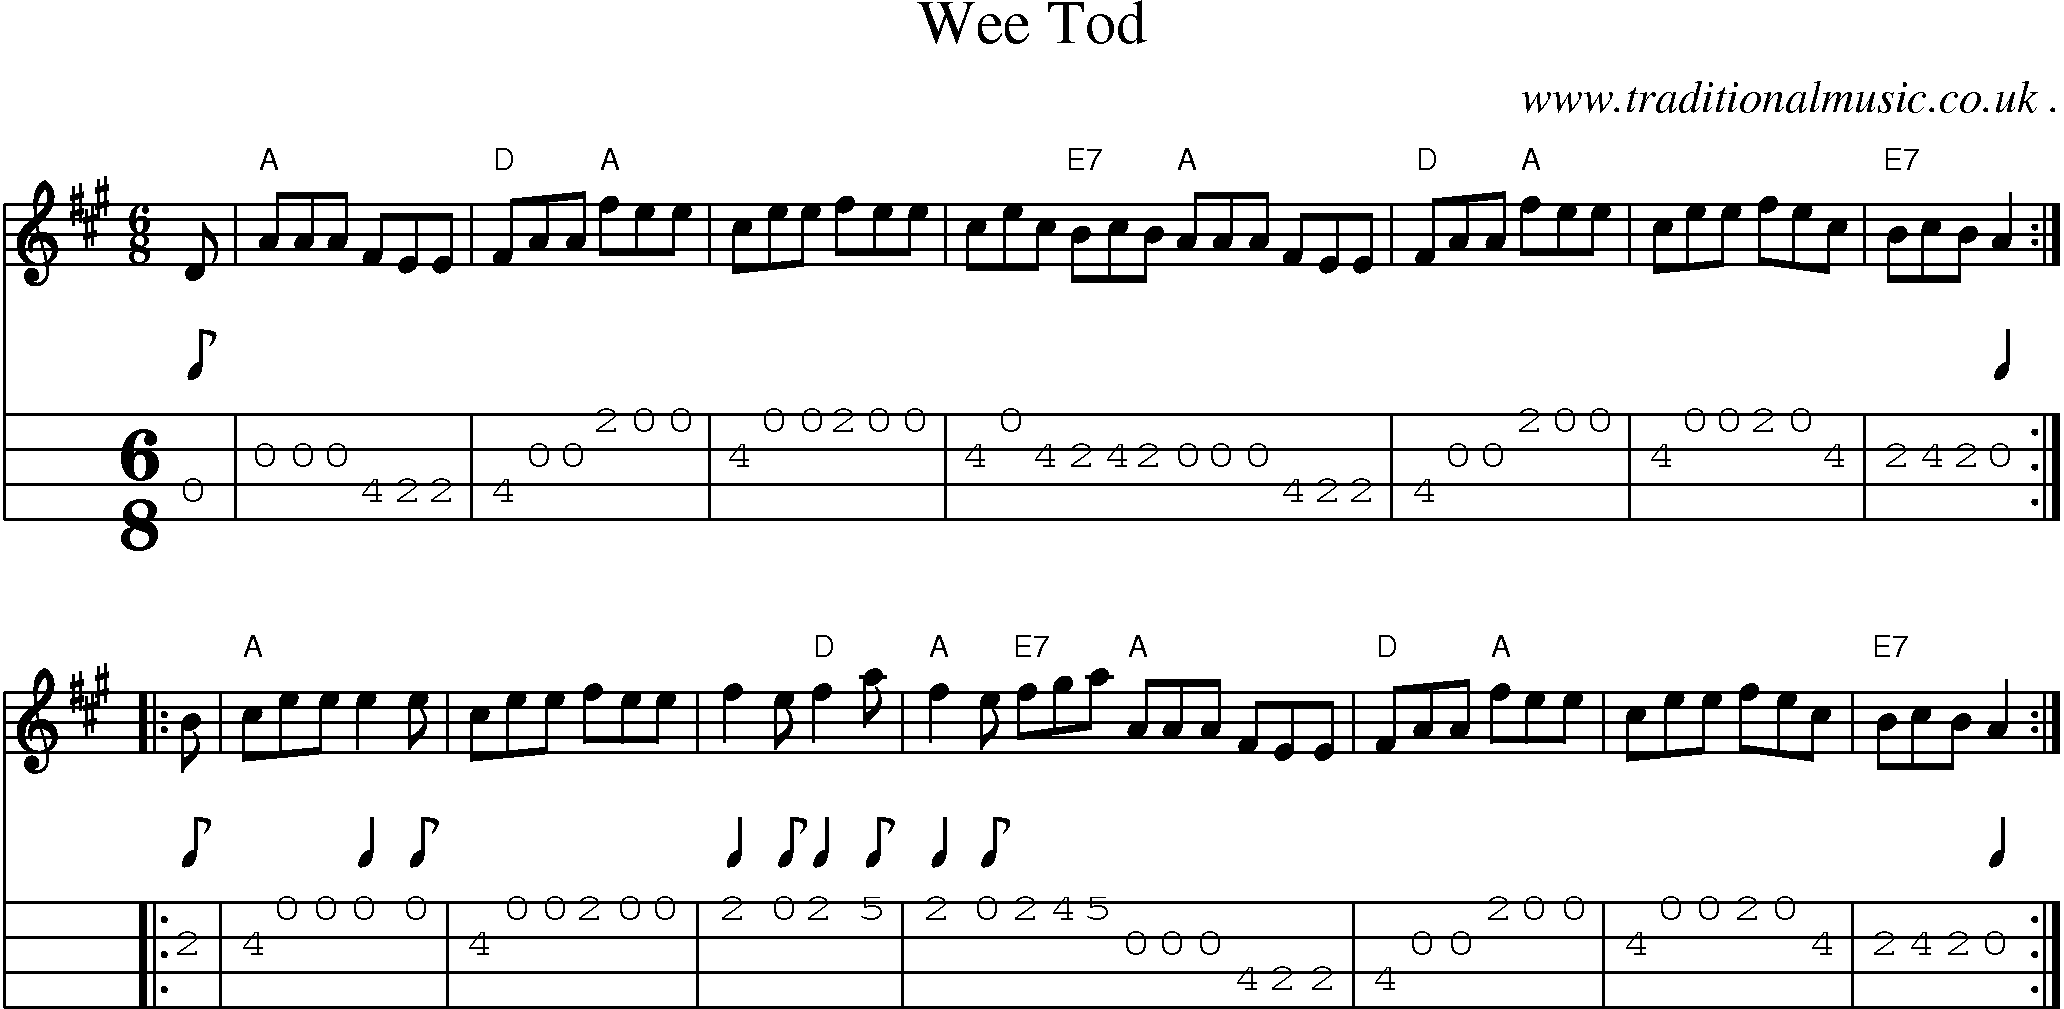 Sheet-music  score, Chords and Mandolin Tabs for Wee Tod